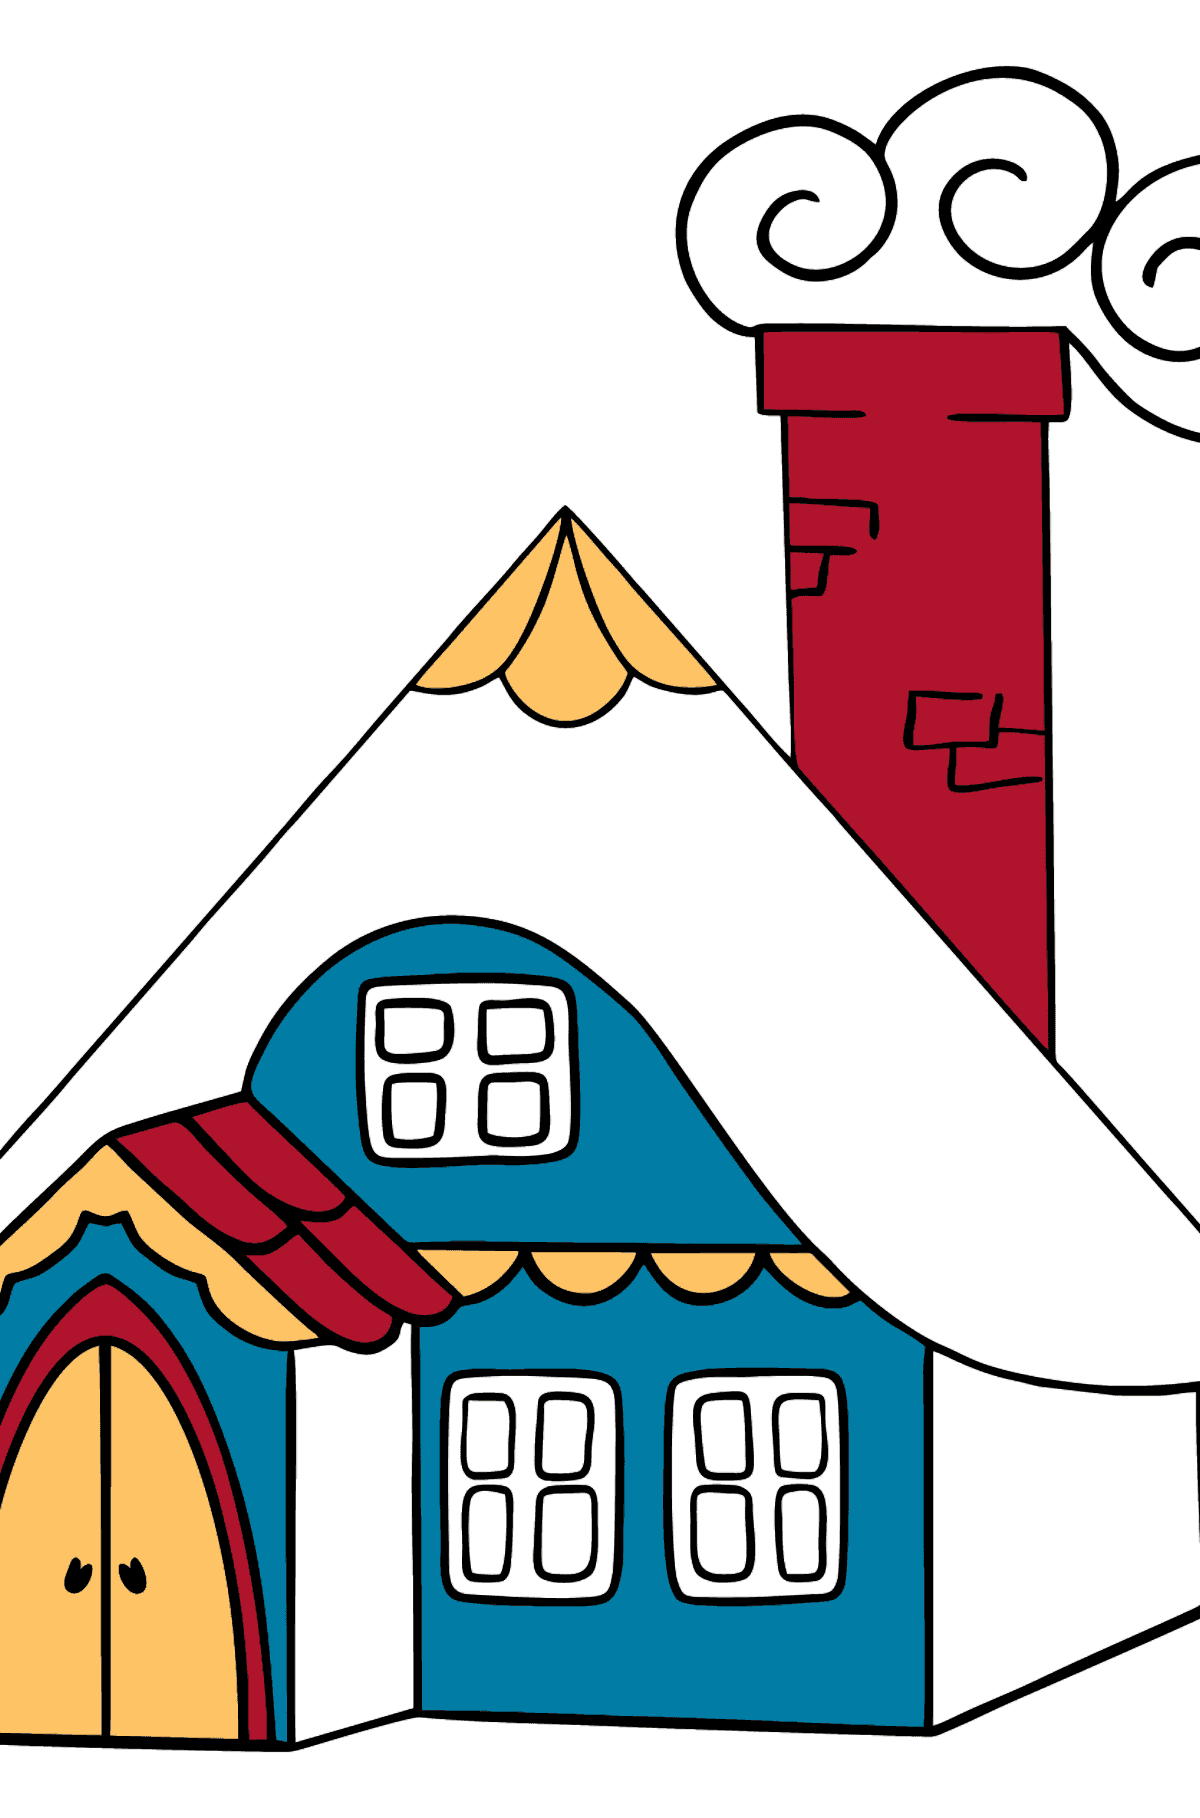 Simple Coloring Page - A Wonderful House - Coloring Pages for Kids